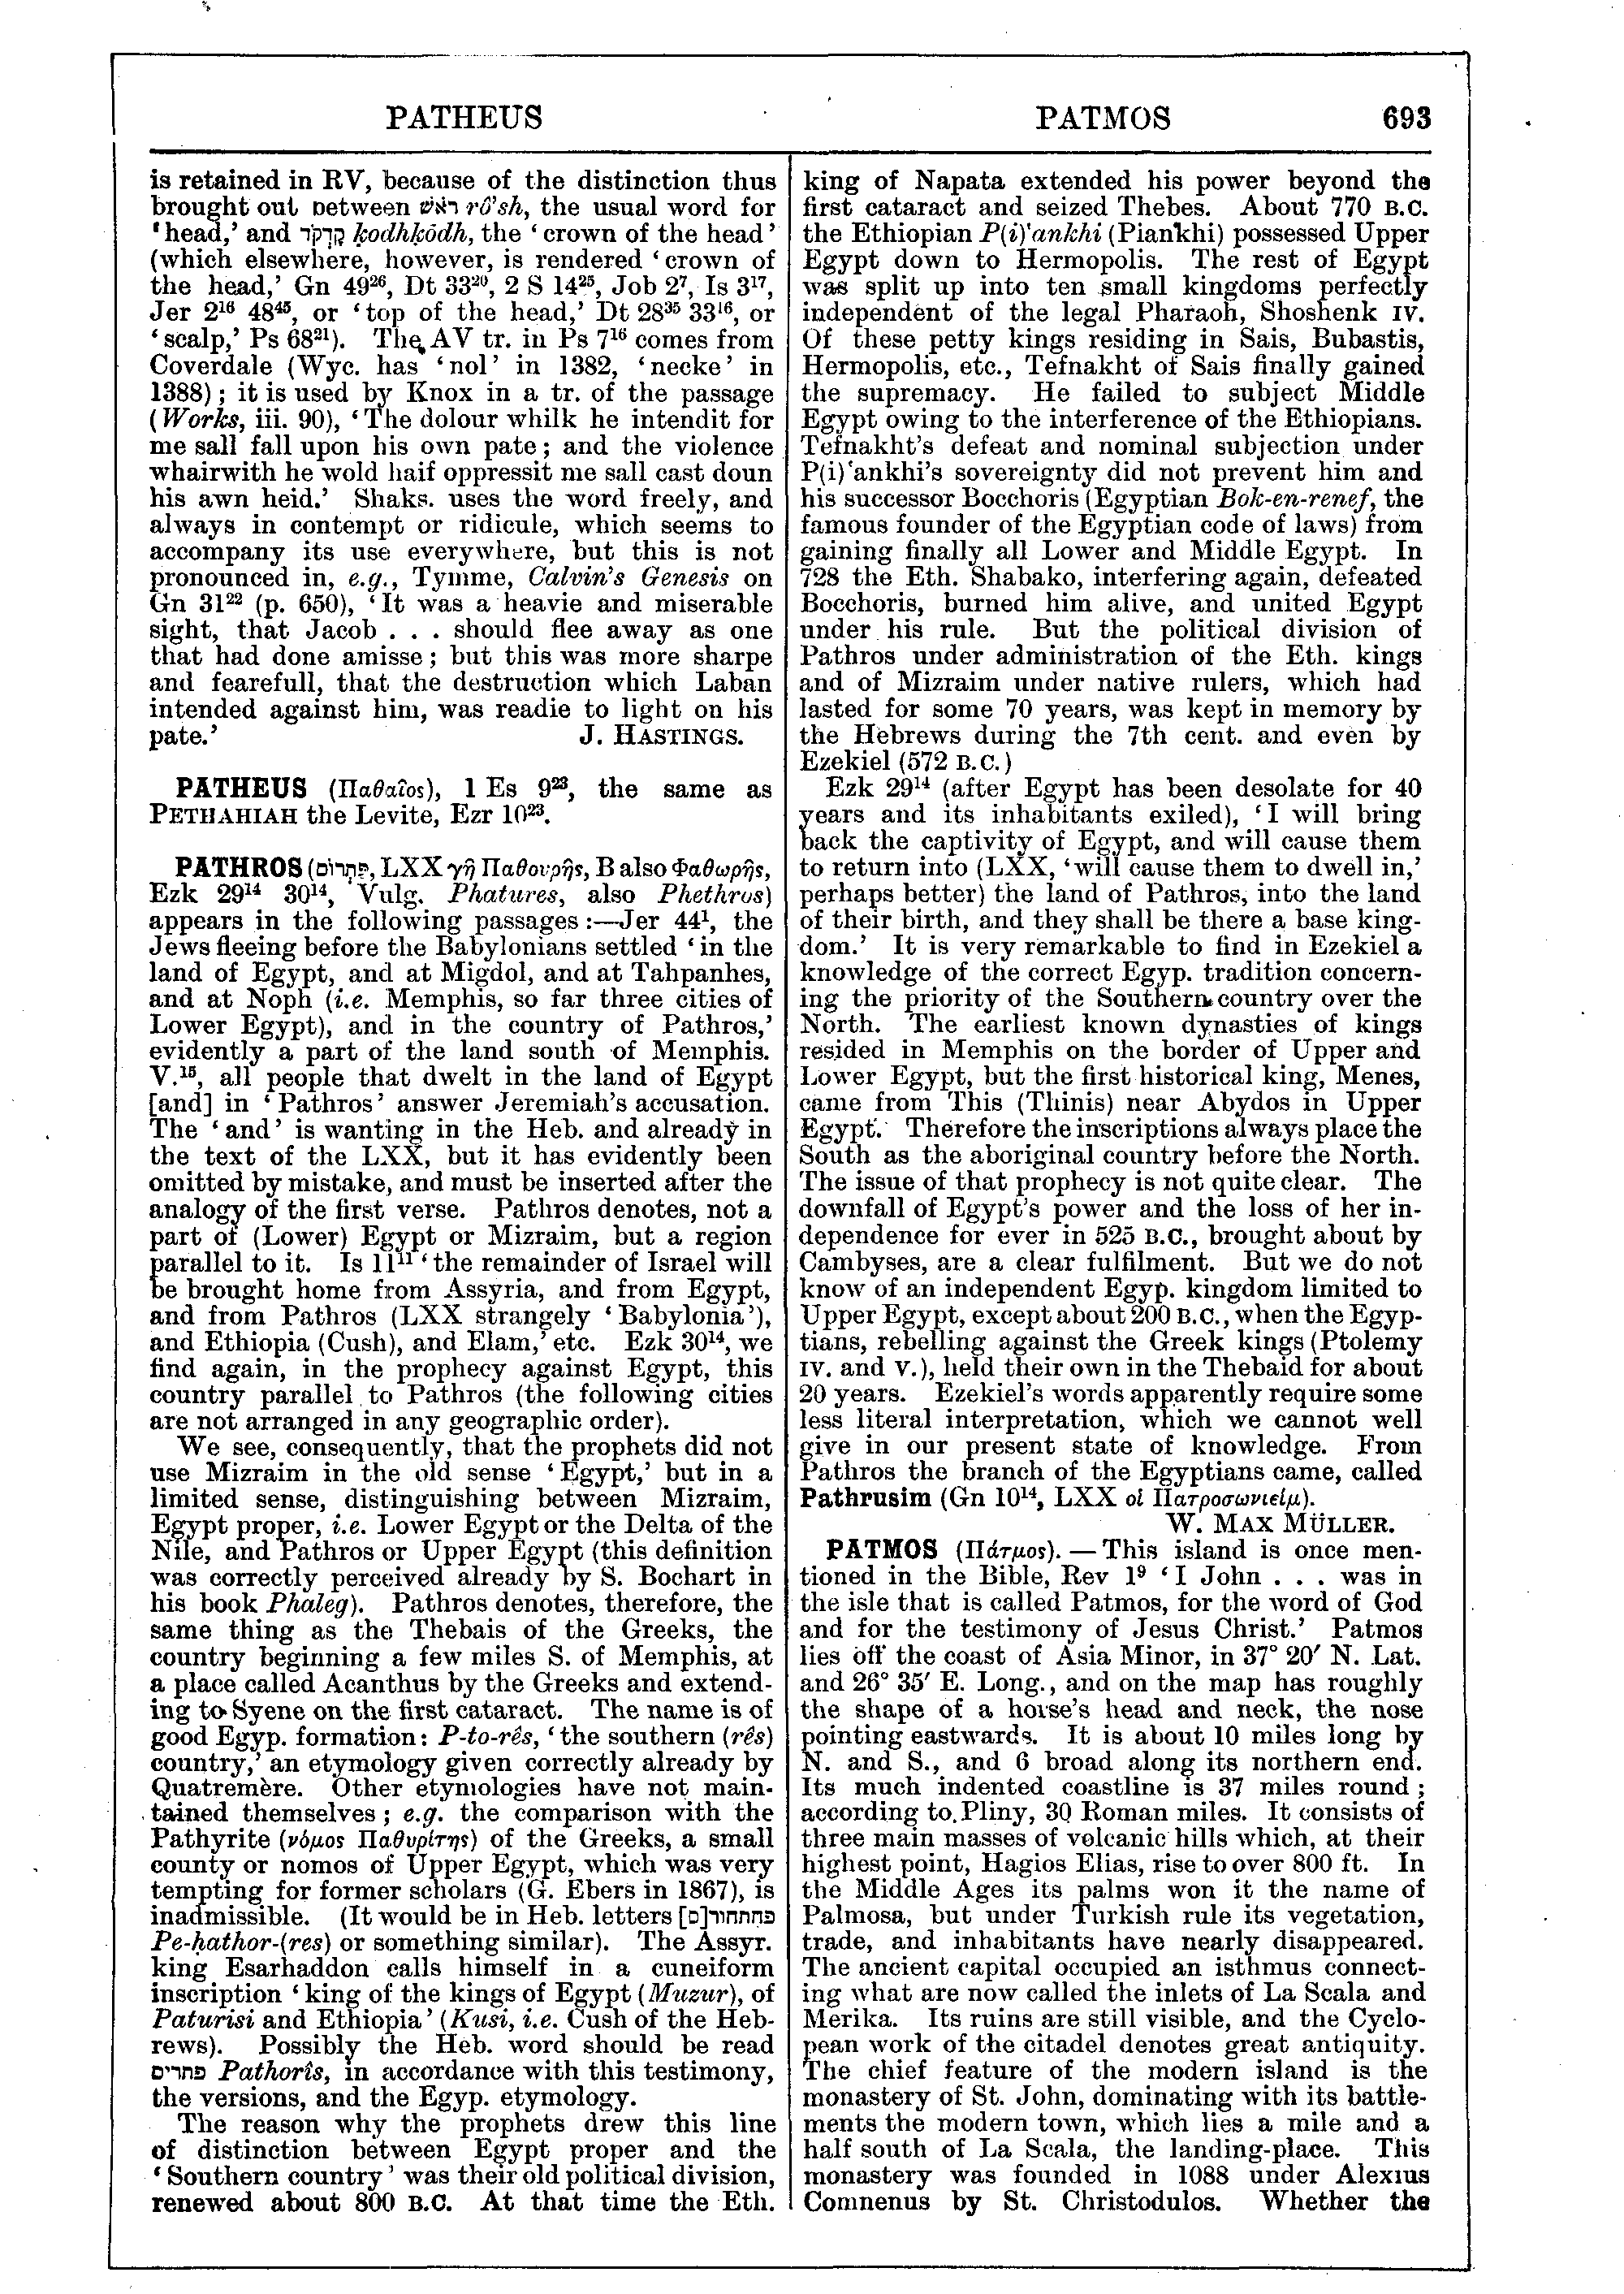 Image of page 693